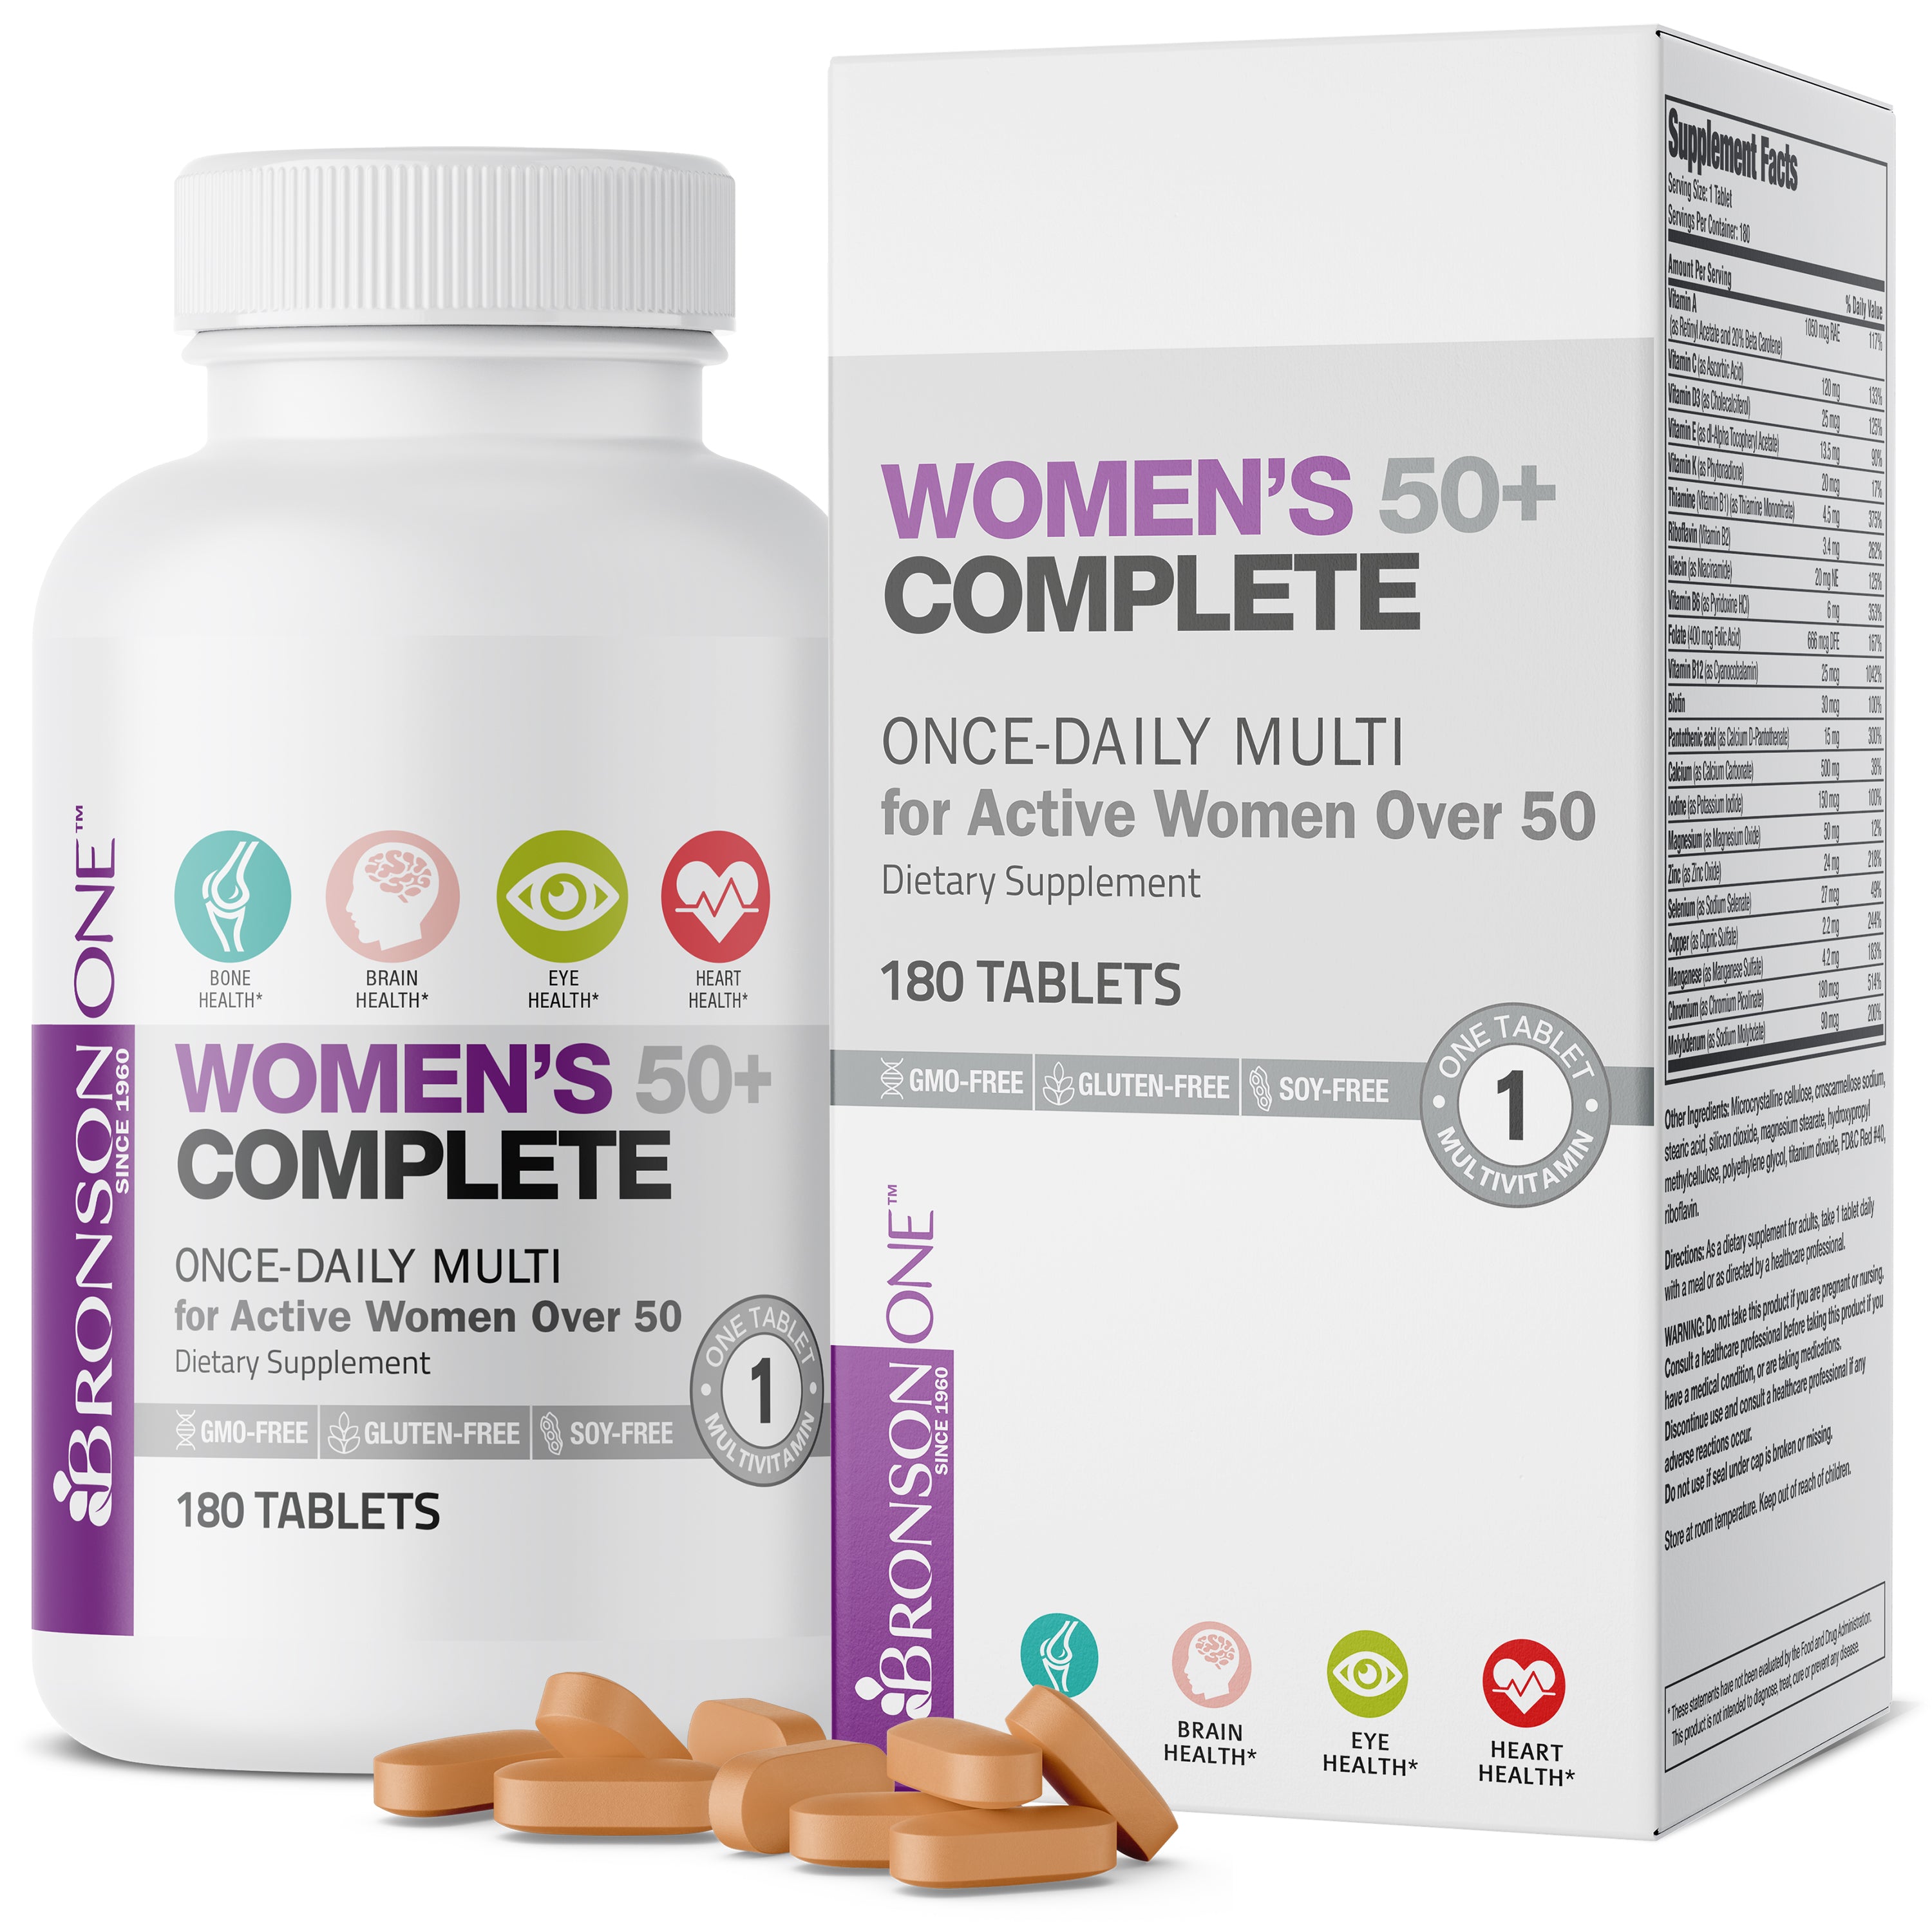 Bronson ONE™ Women’s 50+ Complete Once-Daily Multivitamin